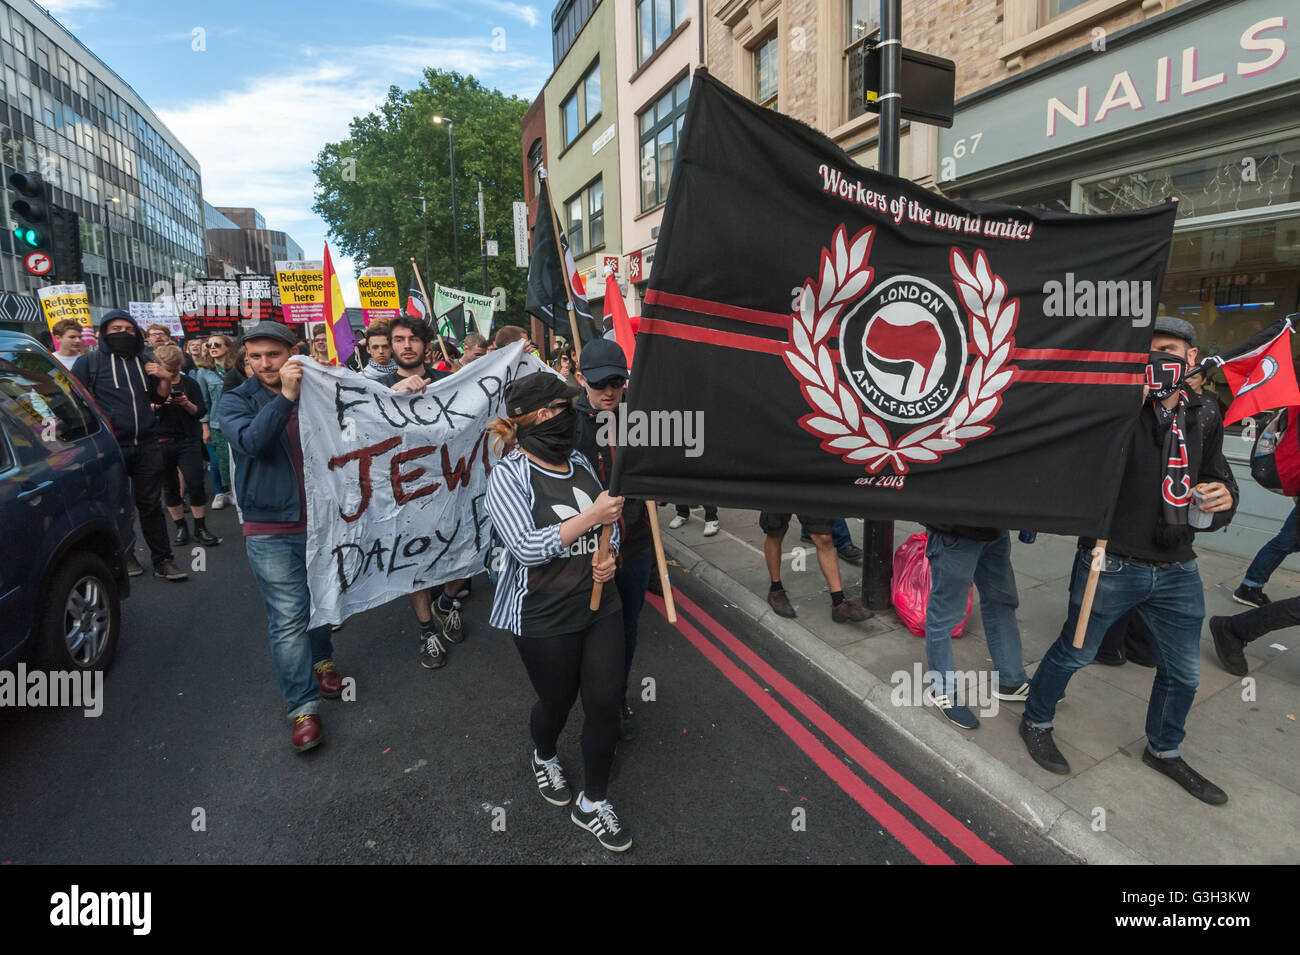 London, UK. June 24th 2016. After a rally in Altab Ali Park, well over a thousand protesters marched to the offices of News International on the day after the UK voted to leave the EU. They were protesting against racism, for migrant rights and against fascist violence and argue that migration and immigrants have been attacked and scapegoated not only by both Remain and Leave campaigns but by mainstream parties and media over more than 20 years, stoking up hatred by insisting immigrants are a 'problem'. Peter Marshall/Alamy Live News Stock Photo